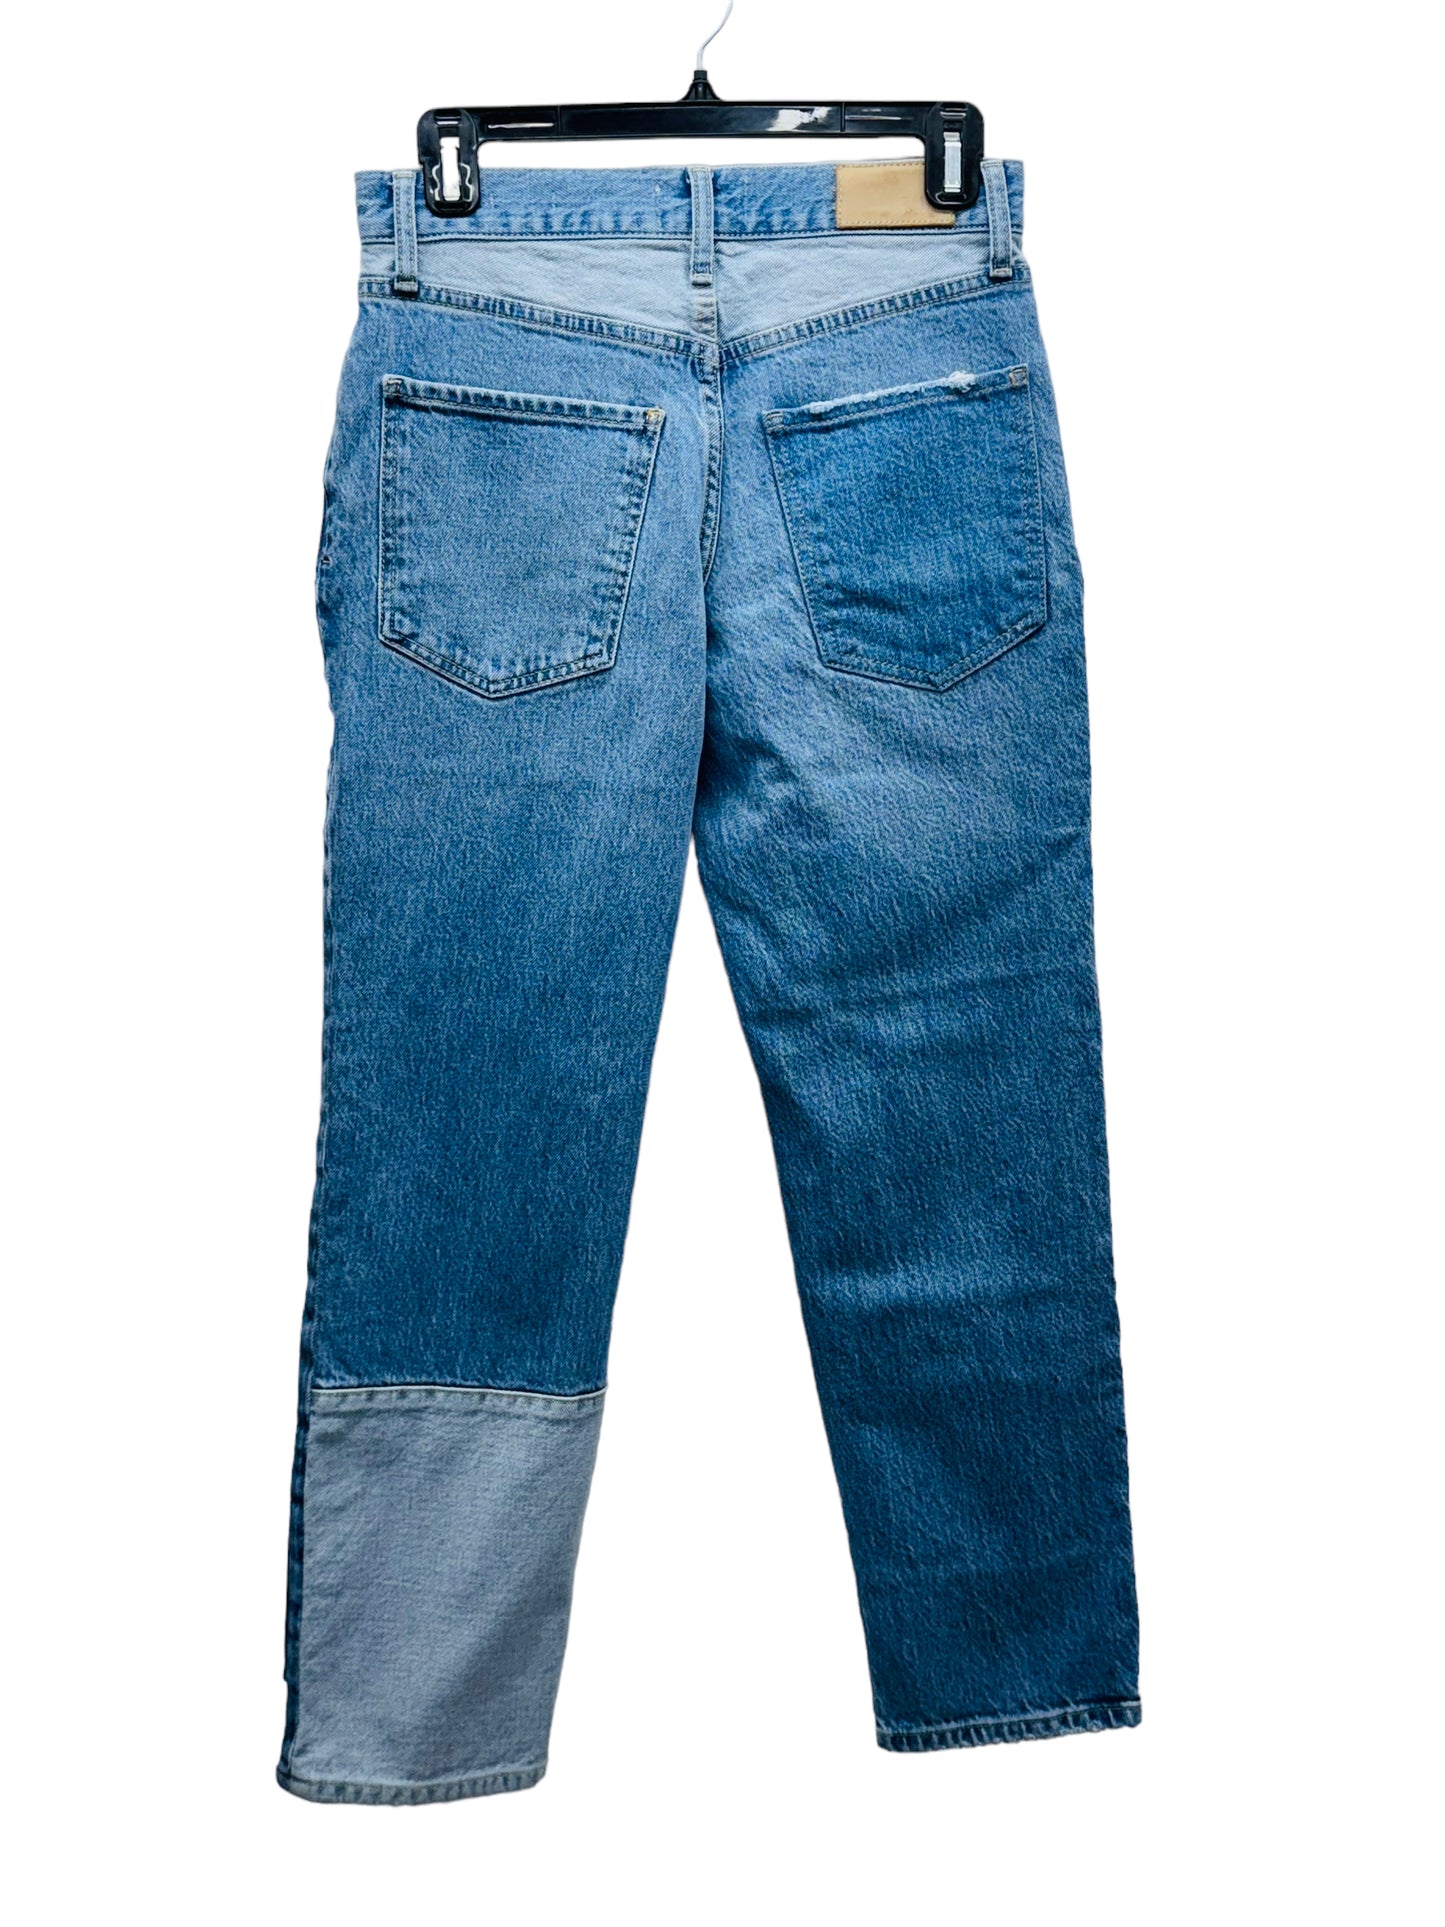 Rails The Atwater Slouchy Straight Fit Blue Patched Jeans - Size 24